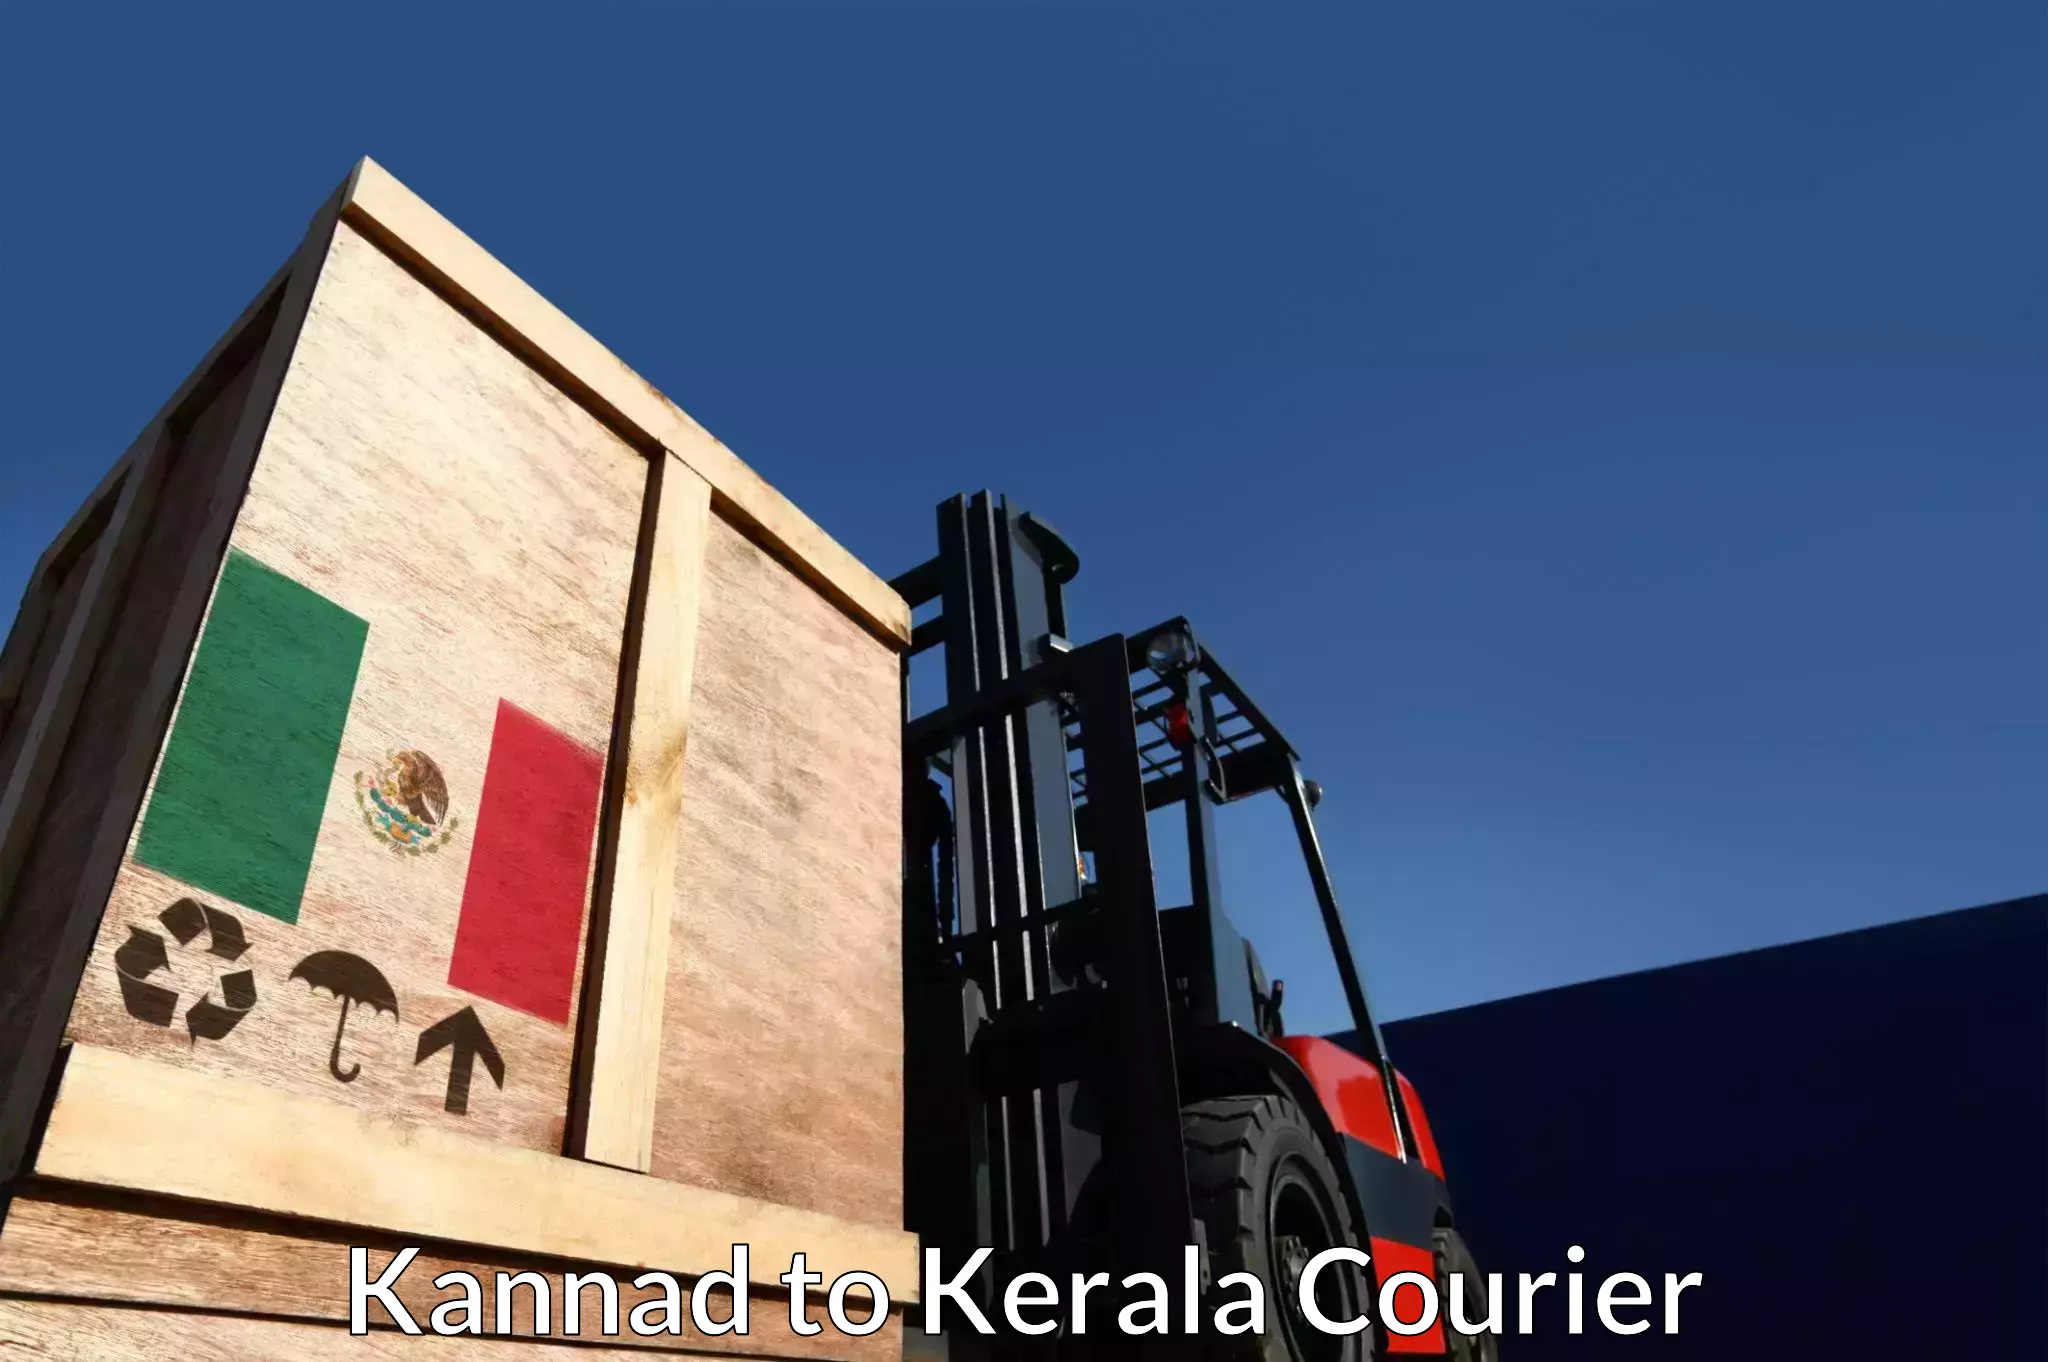 Cargo delivery service Kannad to Cochin Port Kochi